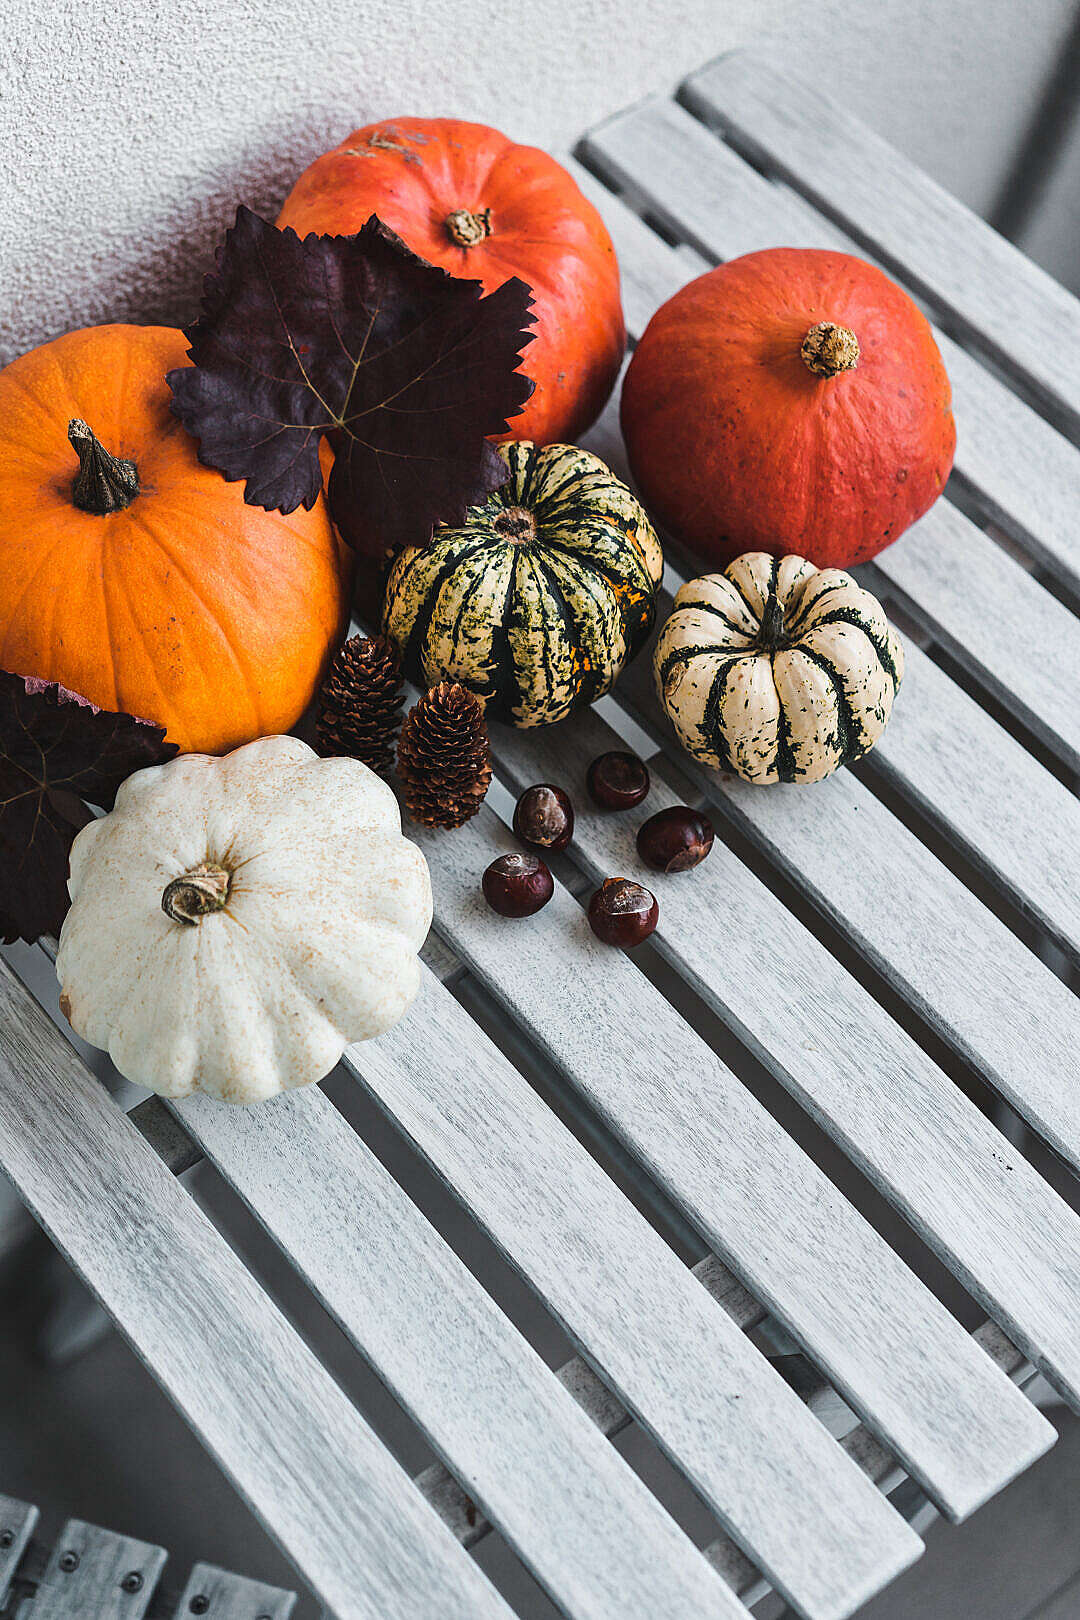 Download Mixed Pumpkins with Autumn Decorations FREE Stock Photo